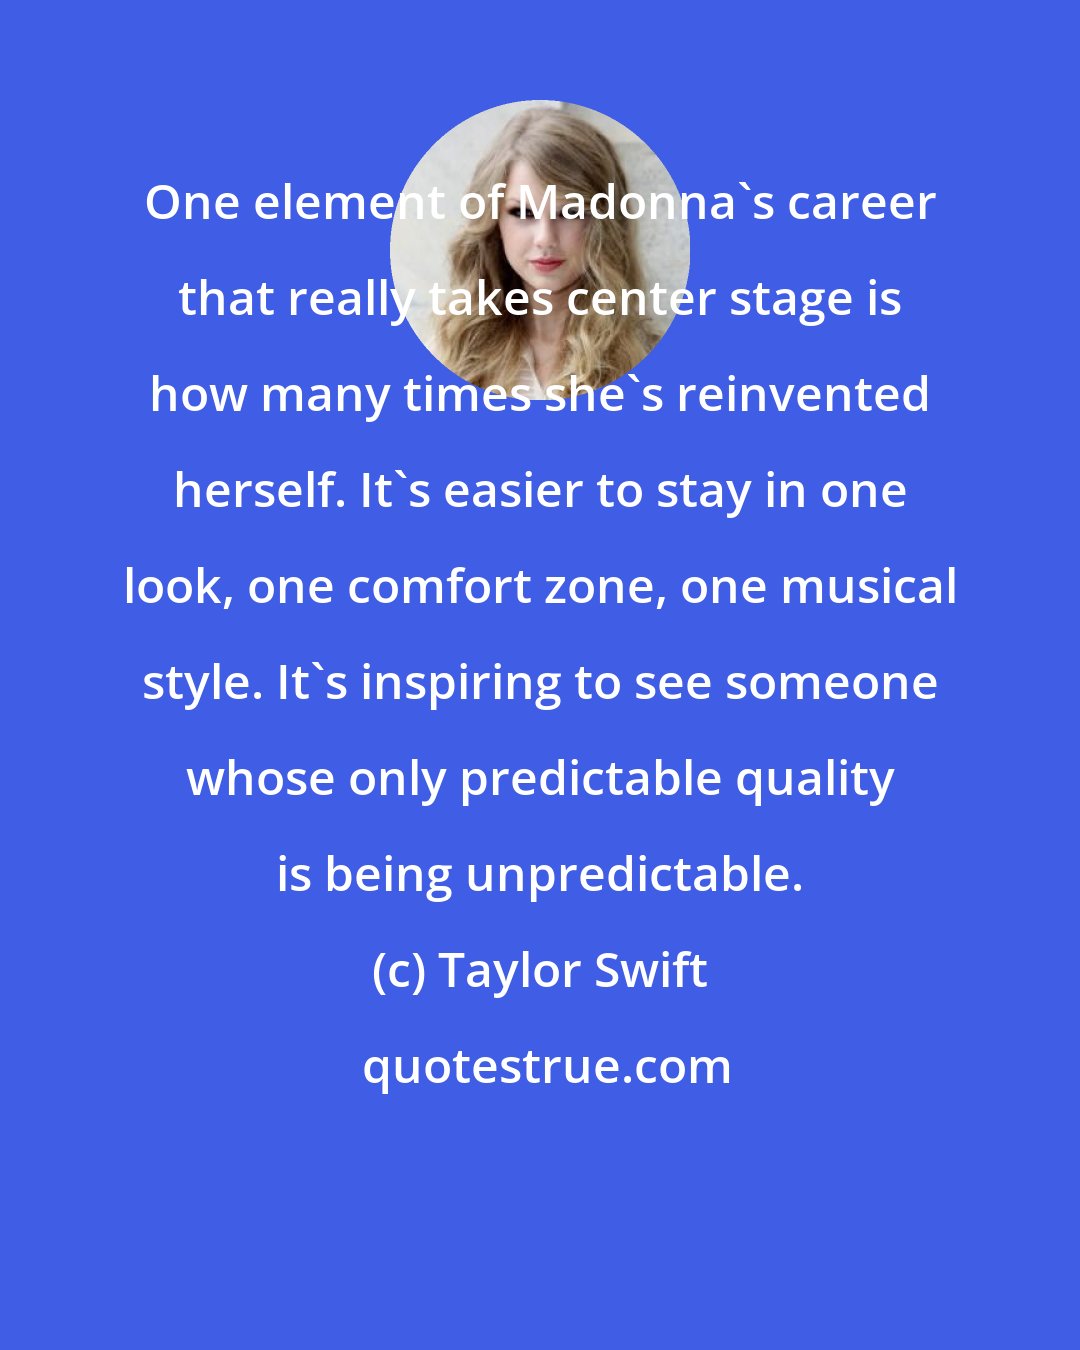 Taylor Swift: One element of Madonna's career that really takes center stage is how many times she's reinvented herself. It's easier to stay in one look, one comfort zone, one musical style. It's inspiring to see someone whose only predictable quality is being unpredictable.